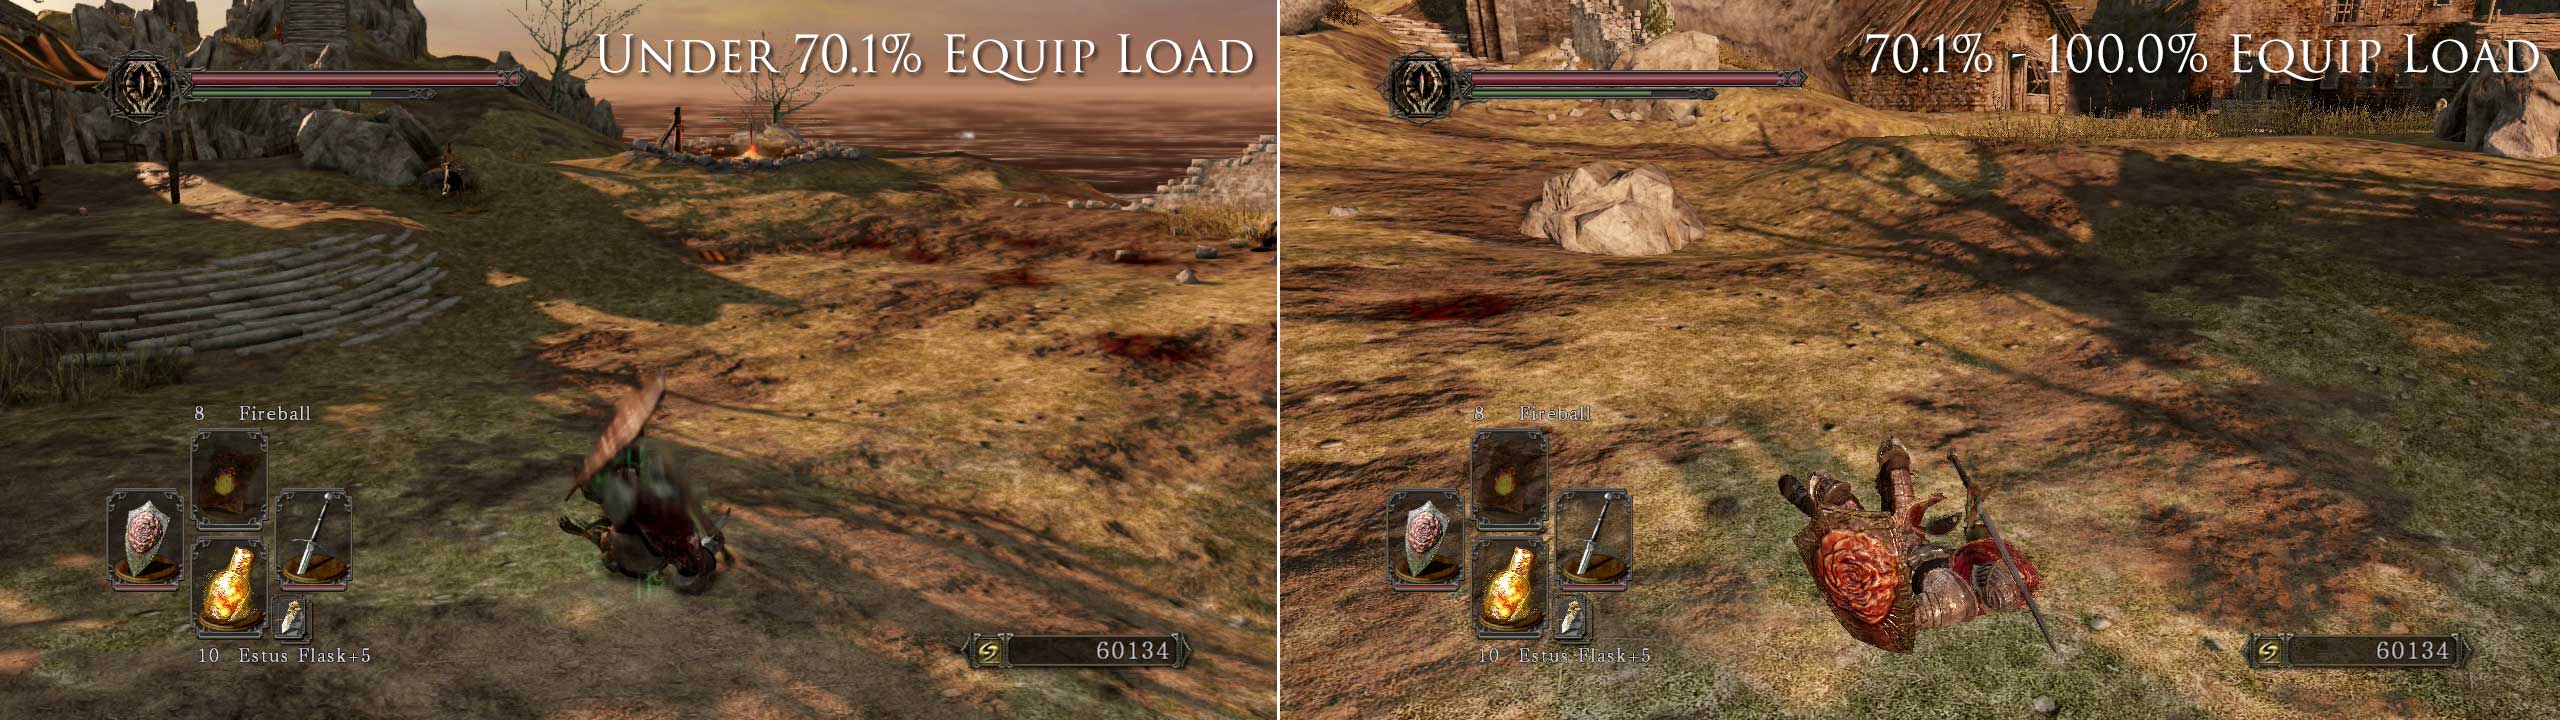 You’re roll’s too slow to need motion-blur when you’re over 70% Equip Load!